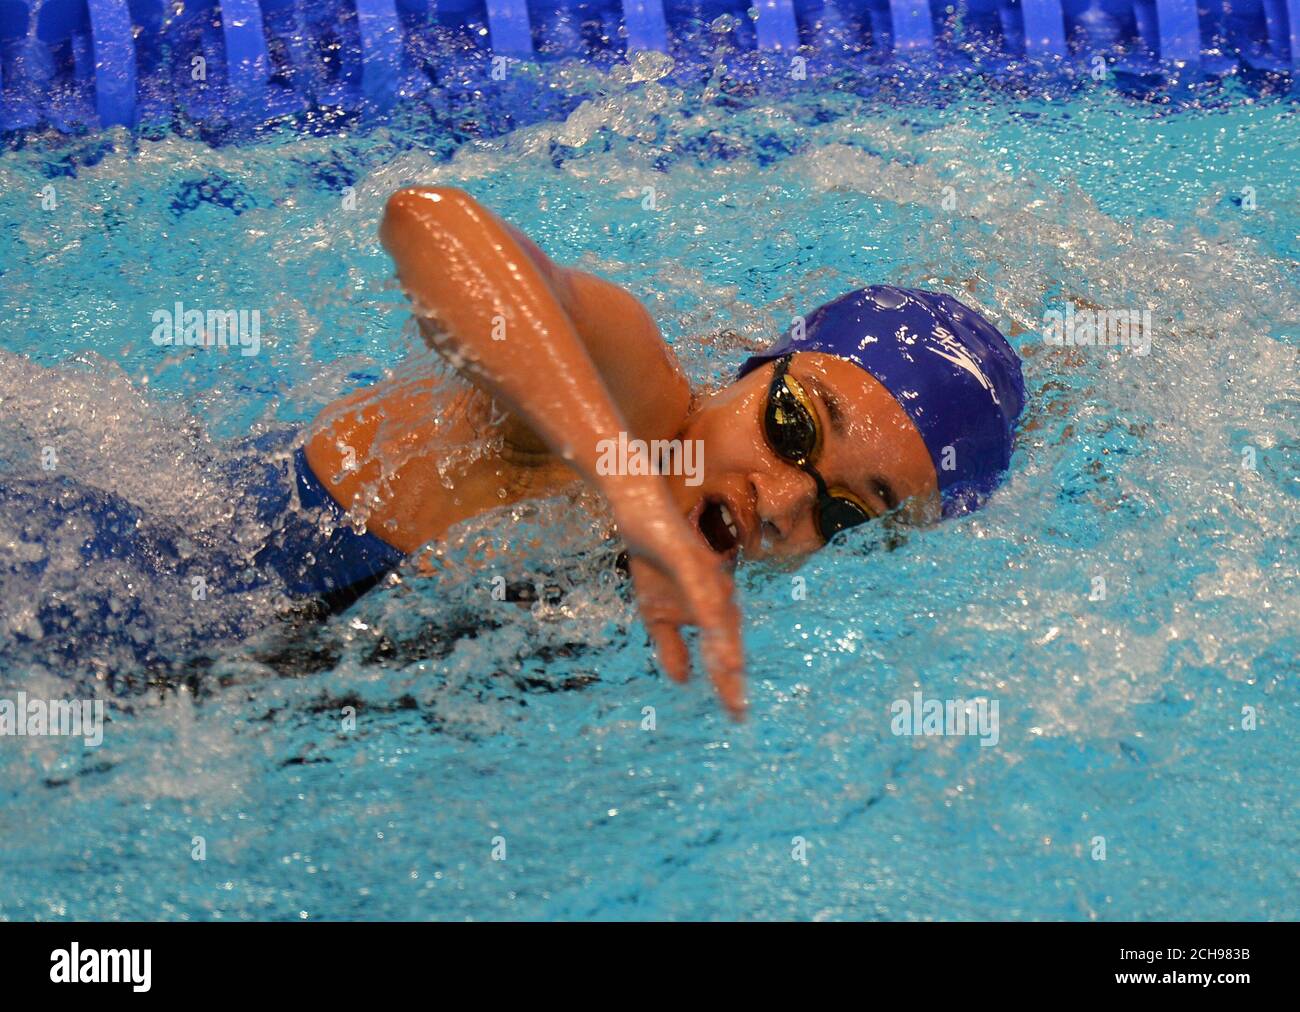 Great Britain's Alice Dearing competes in the Women's 800m Freestyle heats during day ten of the European Aquatics Championships at the London Aquatics Centre, Stratford. PRESS ASSOCIATION Photo. Picture date: Wednesday May 18, 2016. See PA story SWIMMING London. Photo credit should read: Tony Marshall/PA Wire. RESTRICTIONS: Editorial use only, No commercial use without prior permission, please contact PA Images for further information: Tel: +44 (0) 115 8447447. Stock Photo